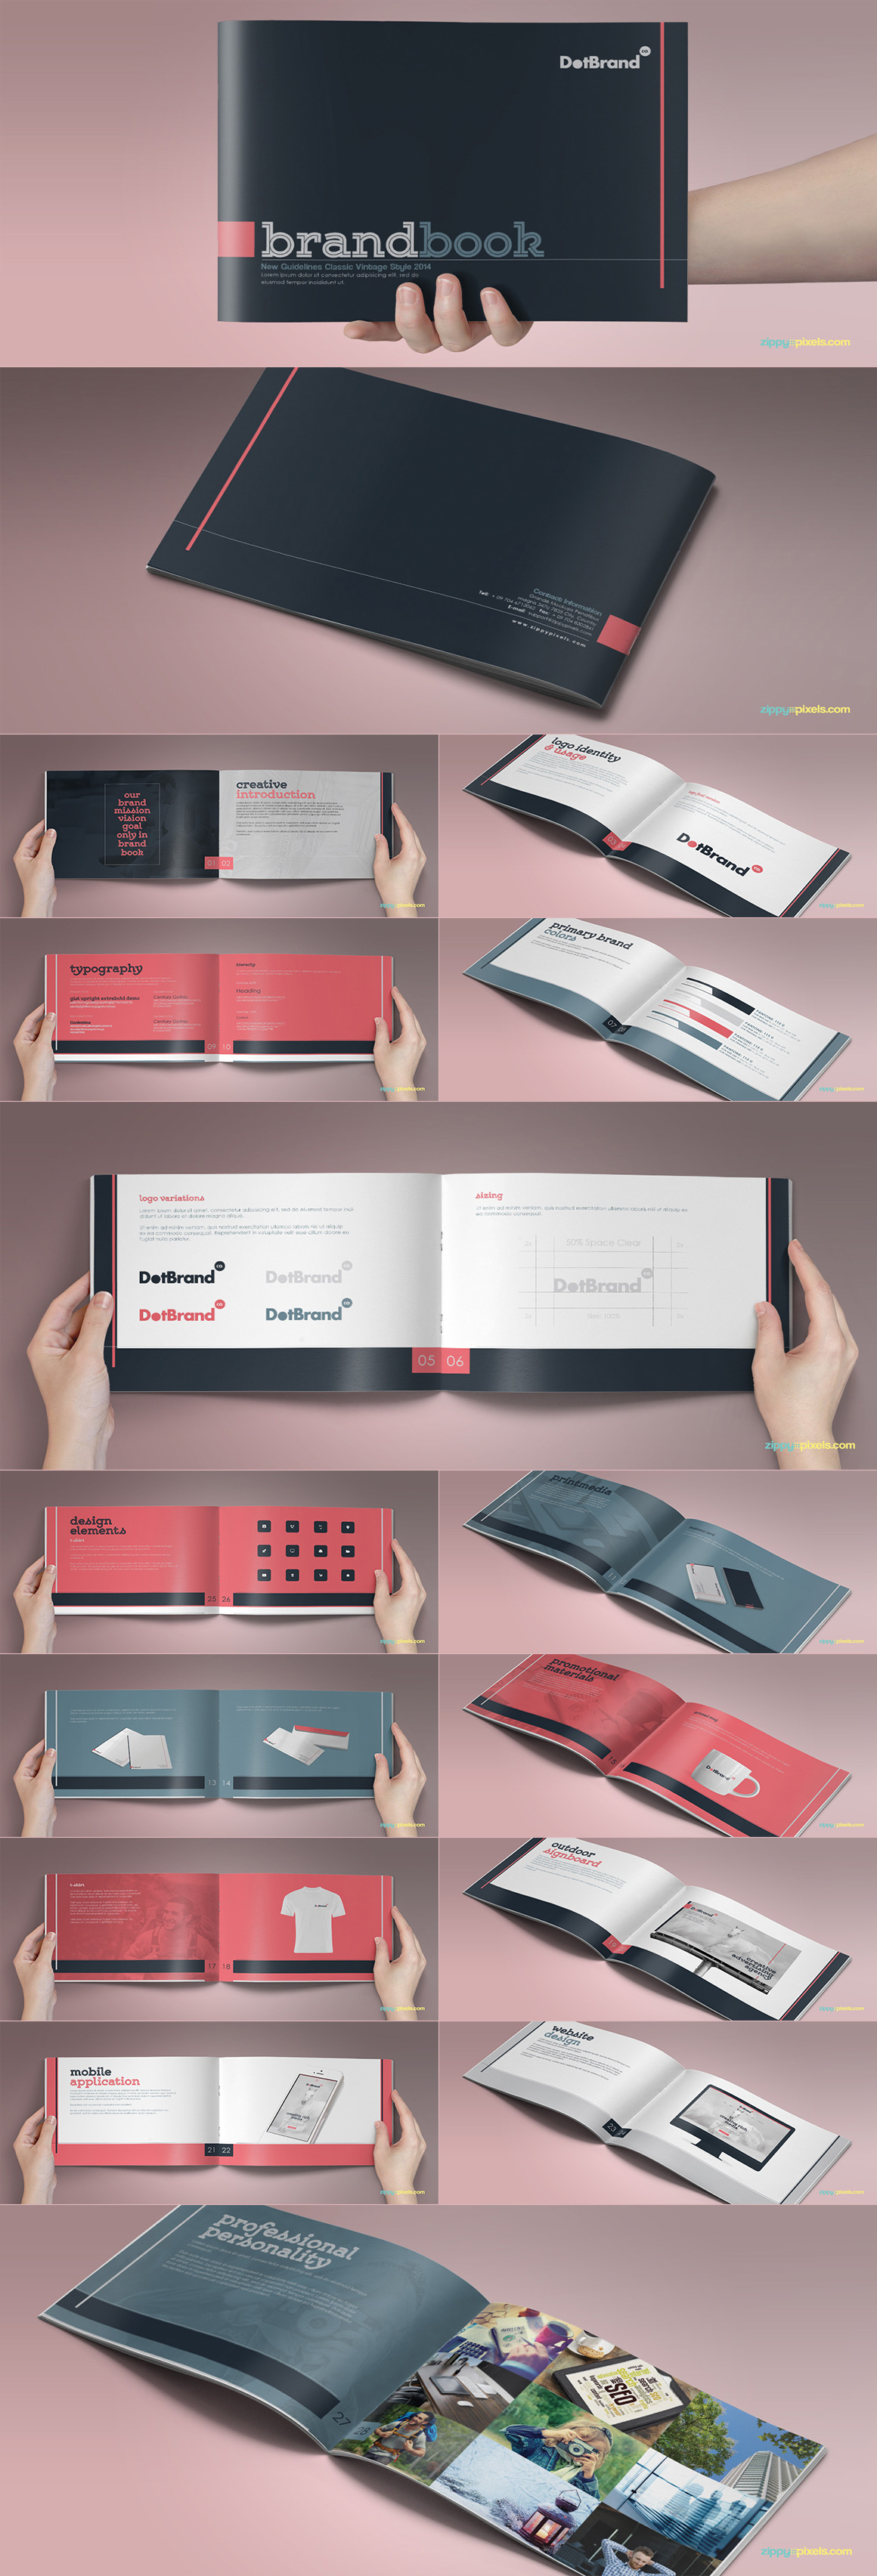 Style Guide & Brand Book Templates-strip8